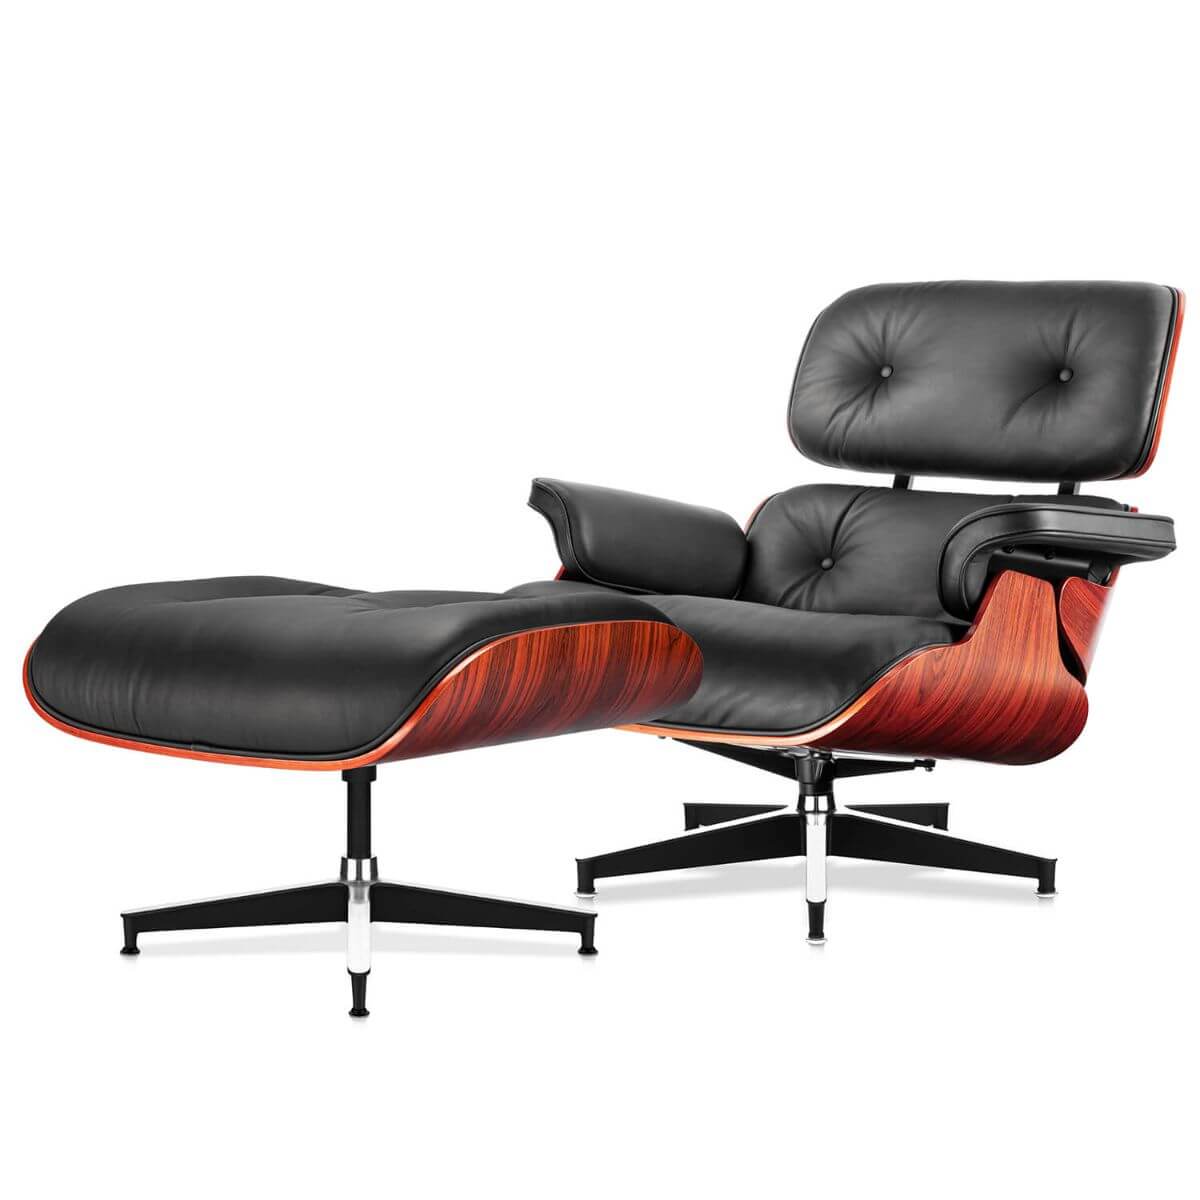 Luxuriance Designs - Eames Lounge Chair and Ottoman Replica (Premium Tall Version) - Dark Palisander Black - Review